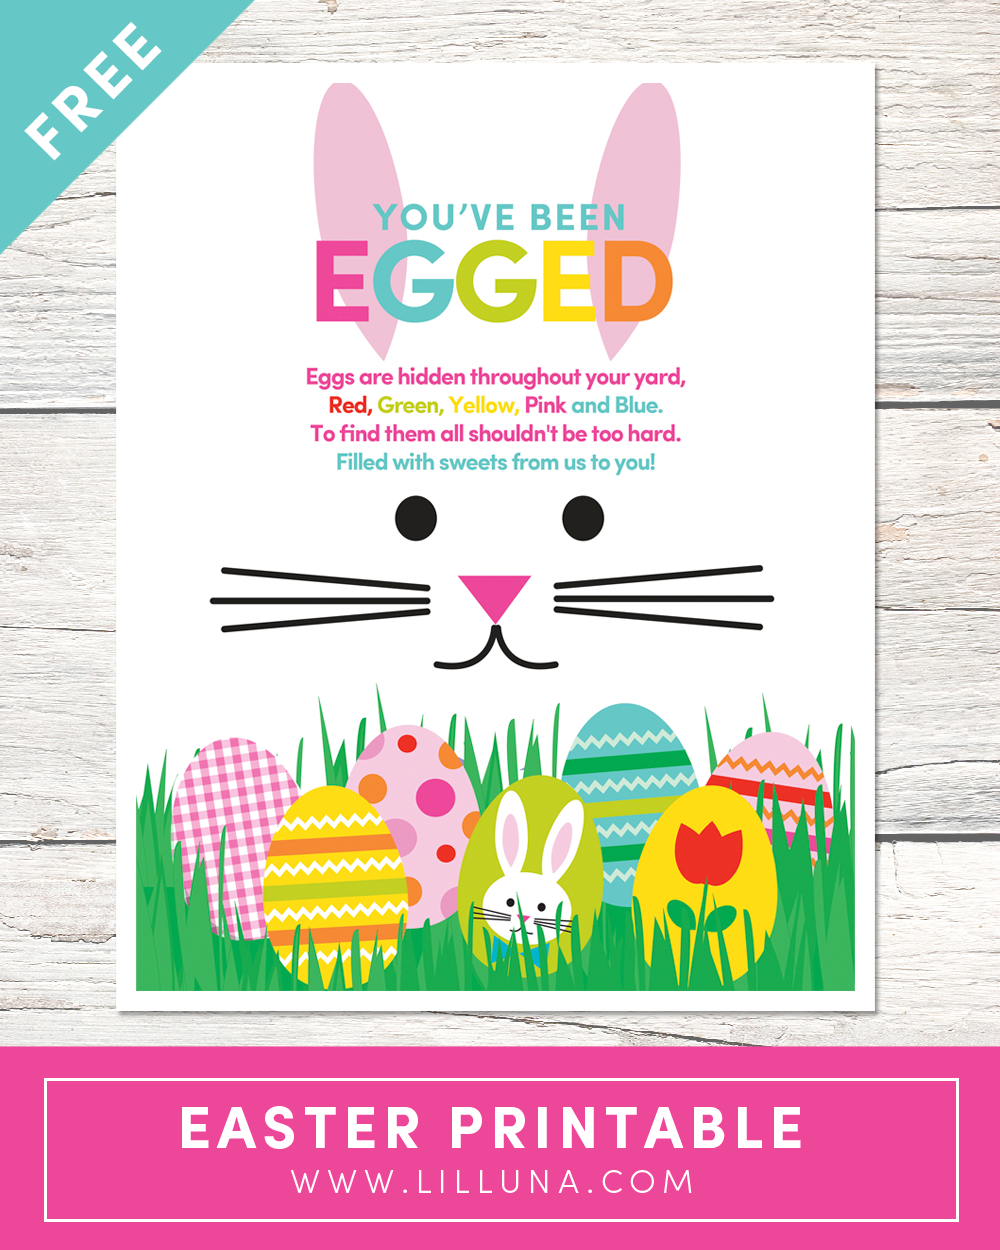 10 Best Easter Printable Crafts on Love The Day